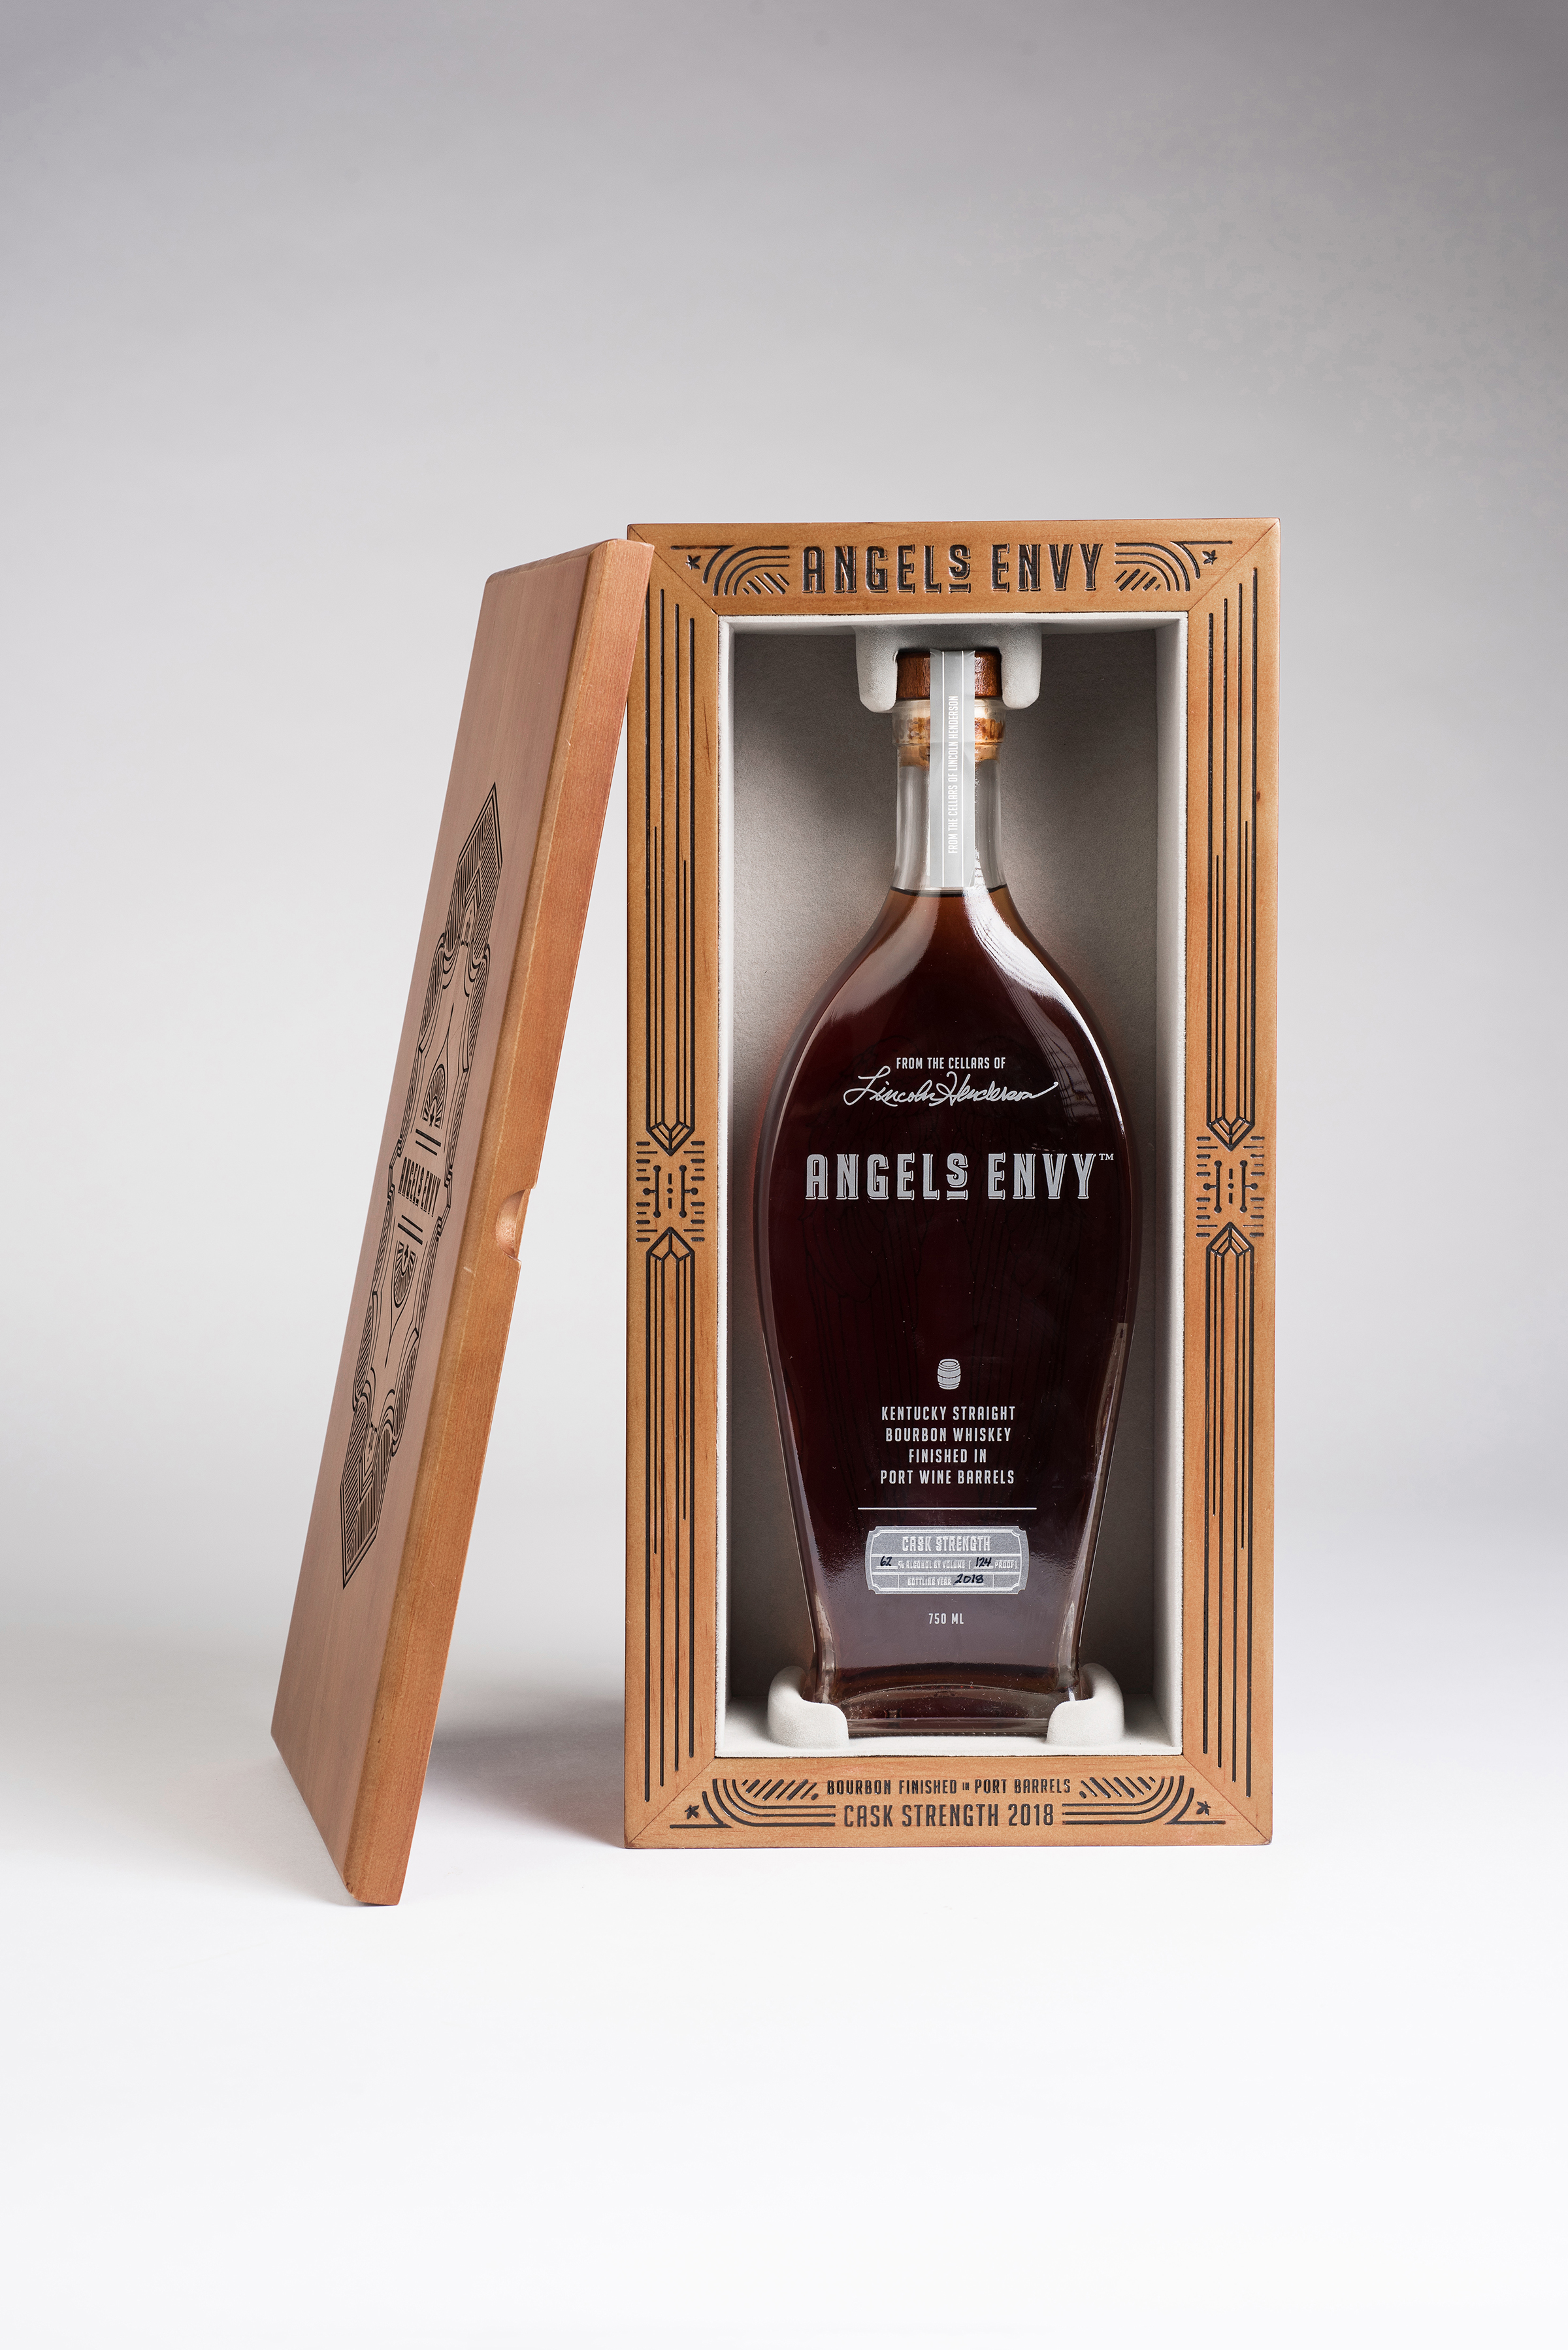 Angel's Envy 2018 Cask Strength Limited Edition